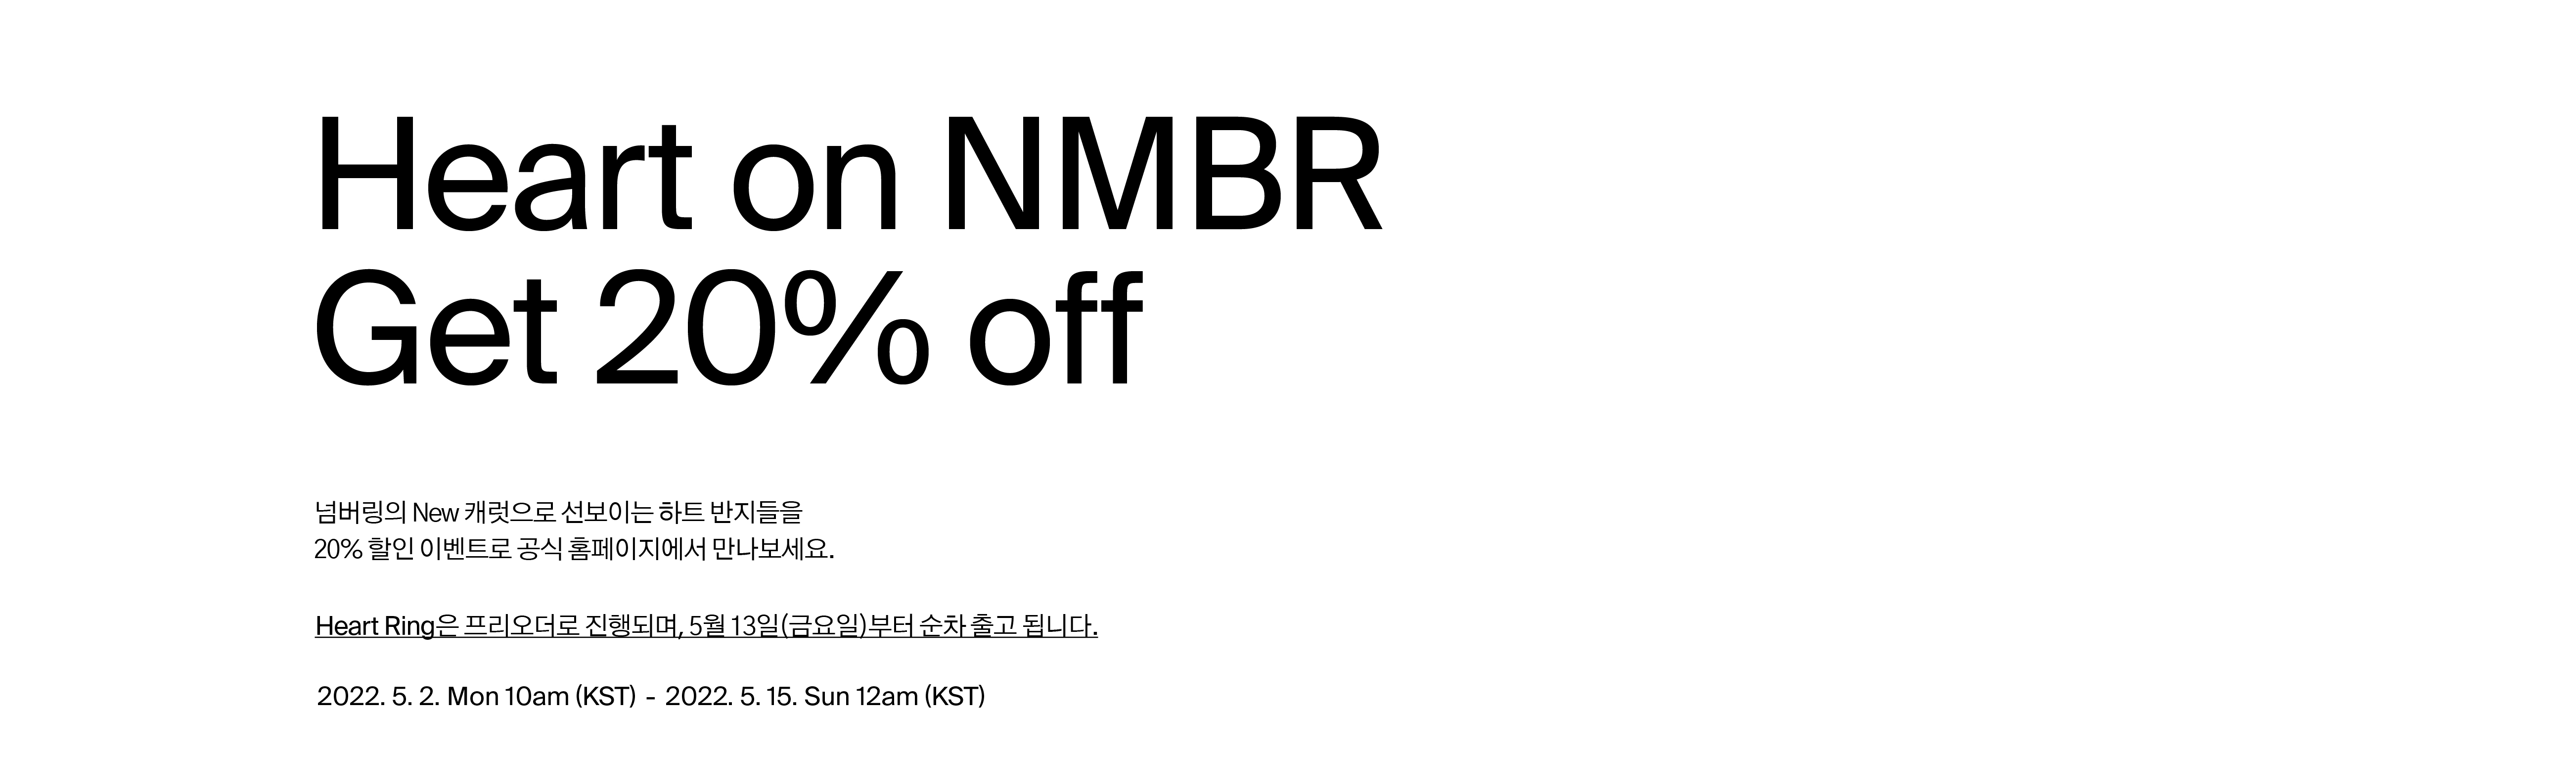 Heart on NMBR Get 20% off